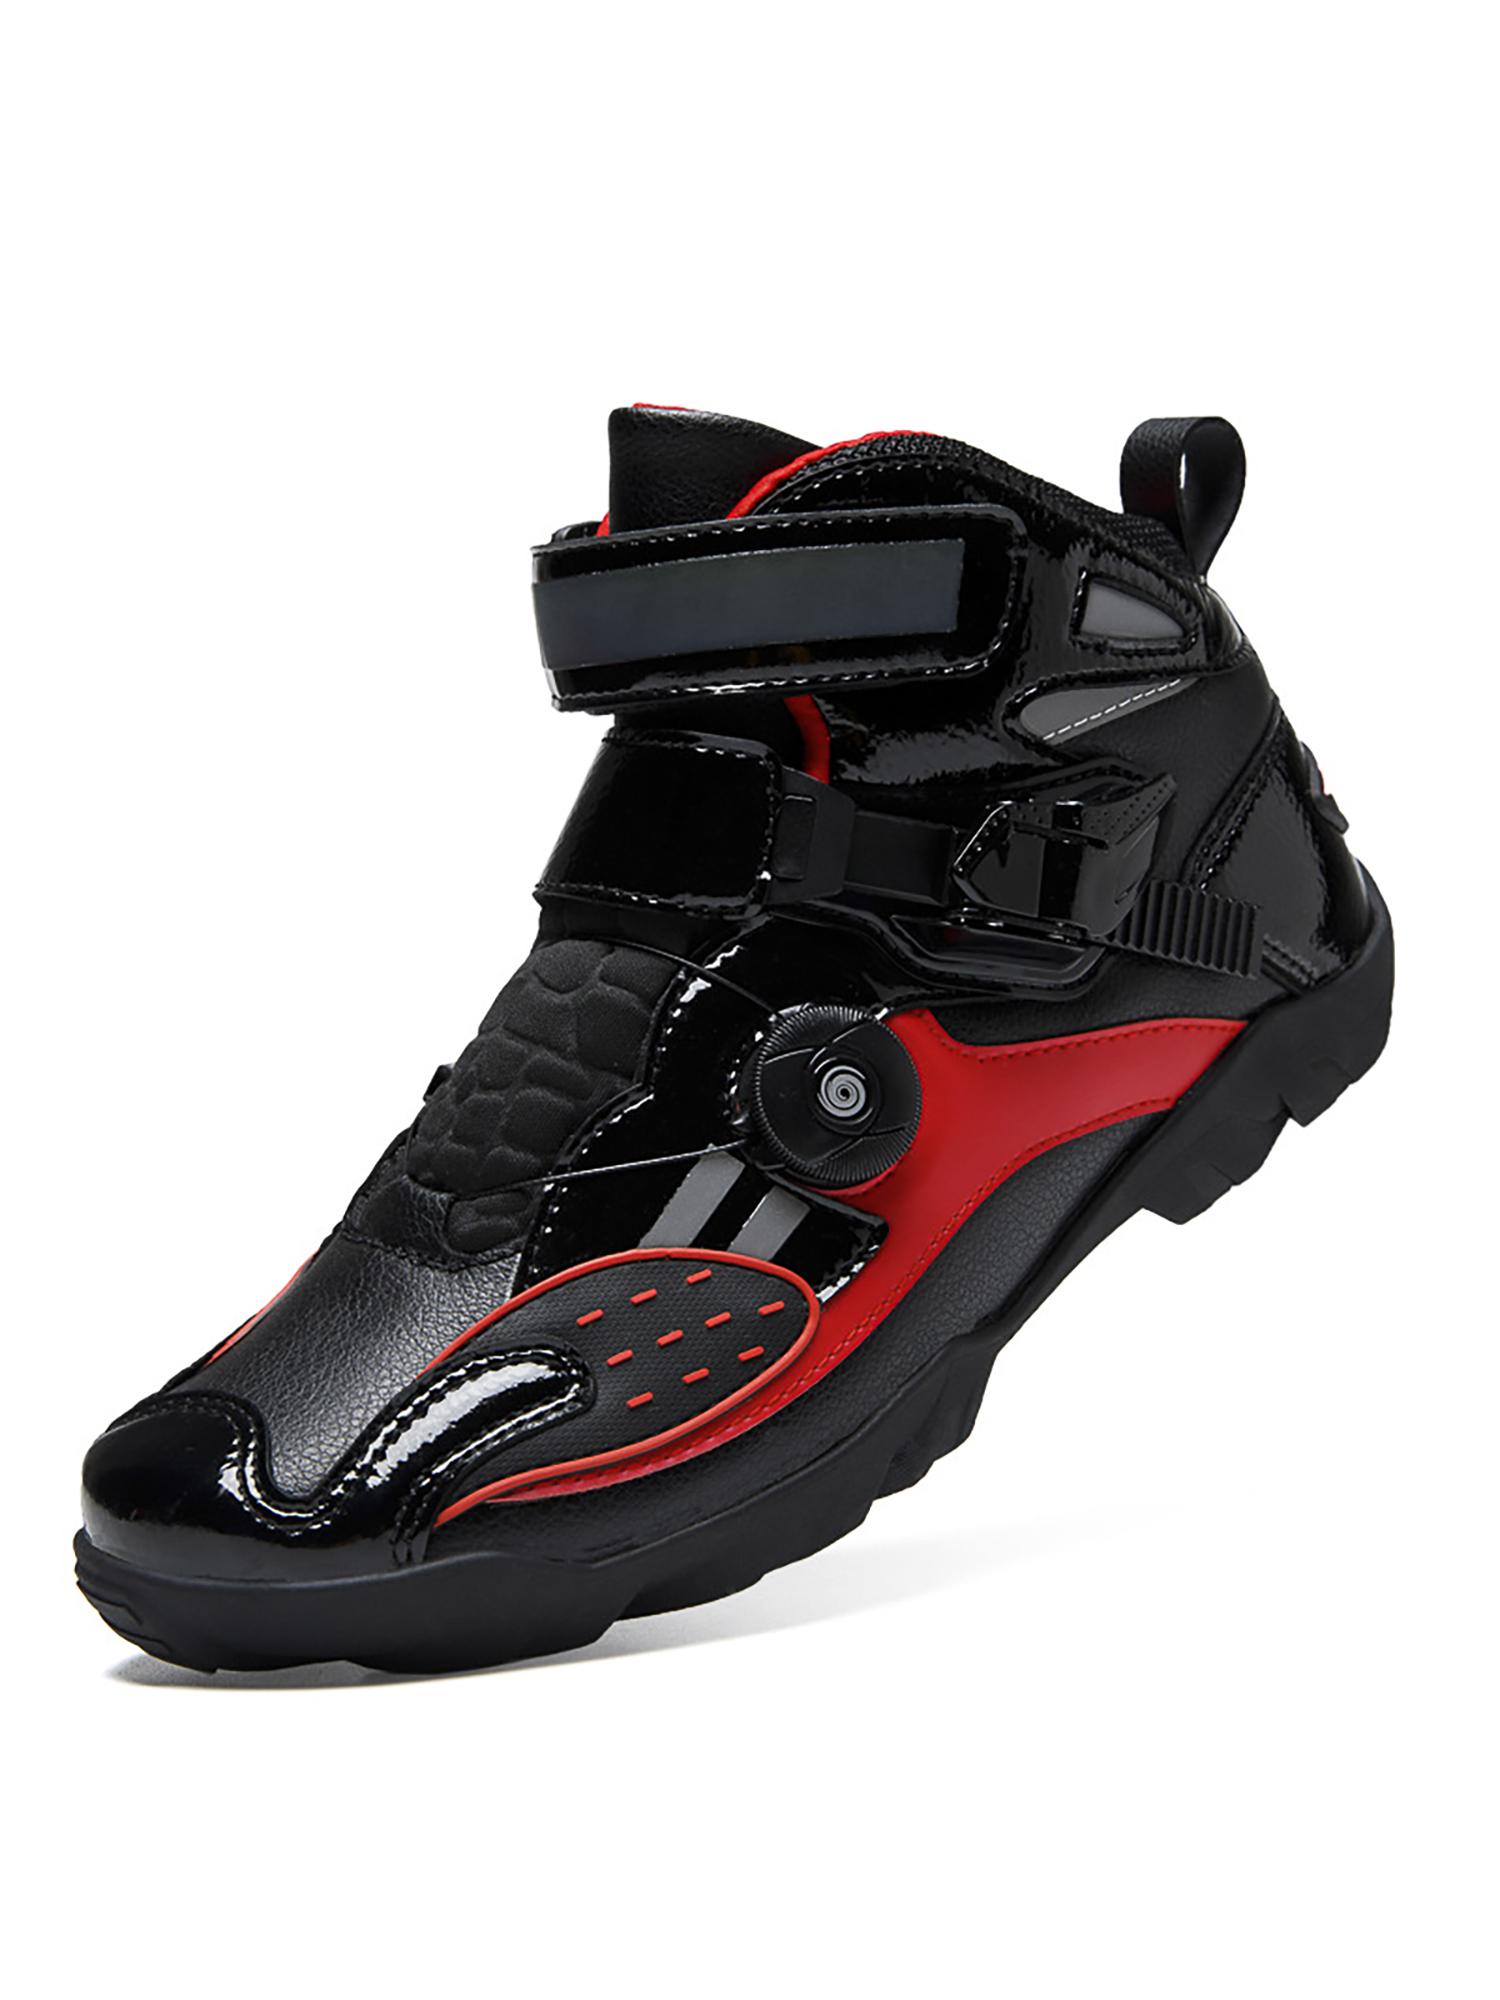 Tenmix Unisex Breathable Riding Shoes Outdoor Lightweight Racing Motorcycle Boots Casual Sports Shoe Black Red 11.5 - image 5 of 9